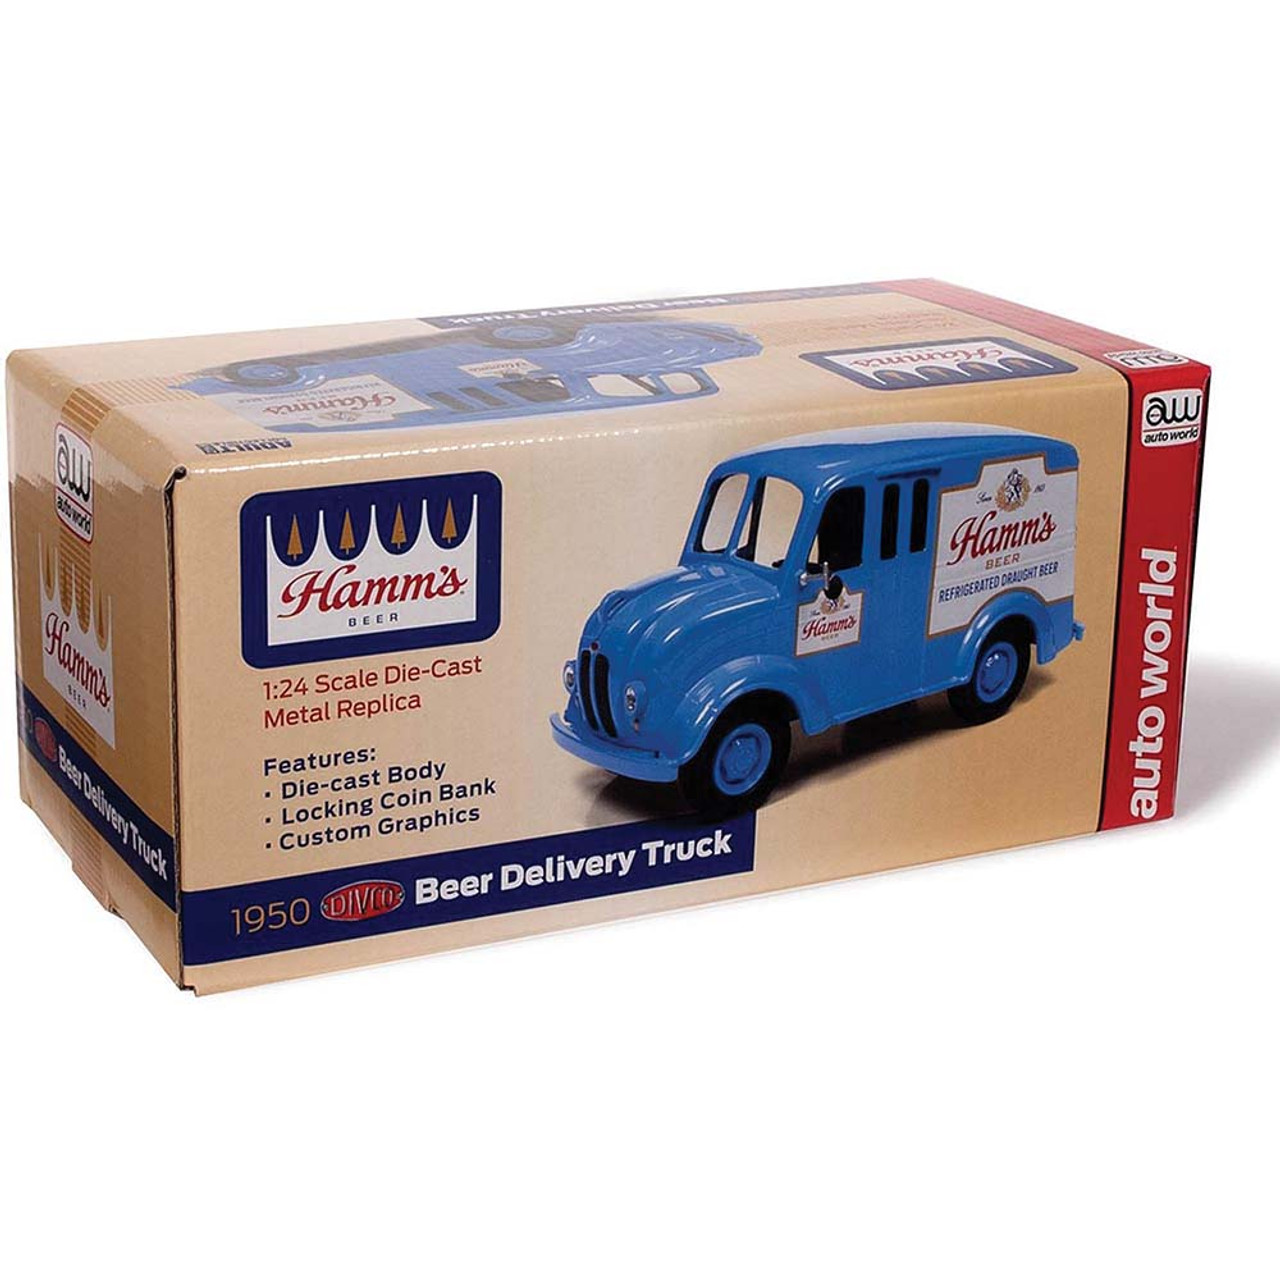 1950 Divco Delivery Truck Hamms Beer Light Blue | Auto World